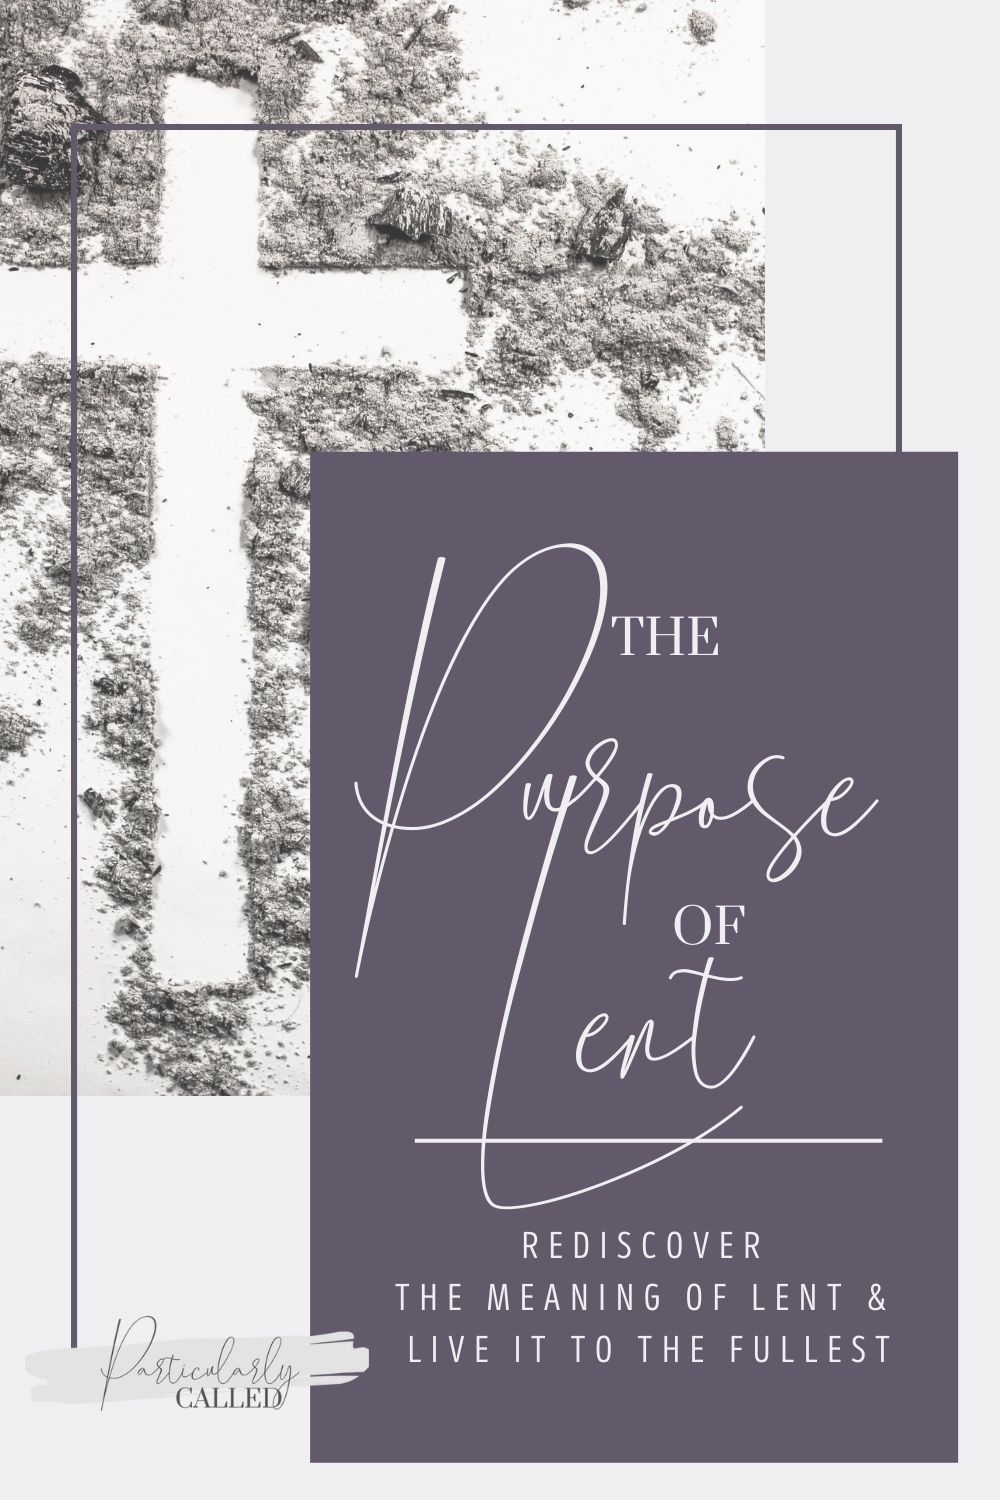 Rediscovering the Purpose of Lent